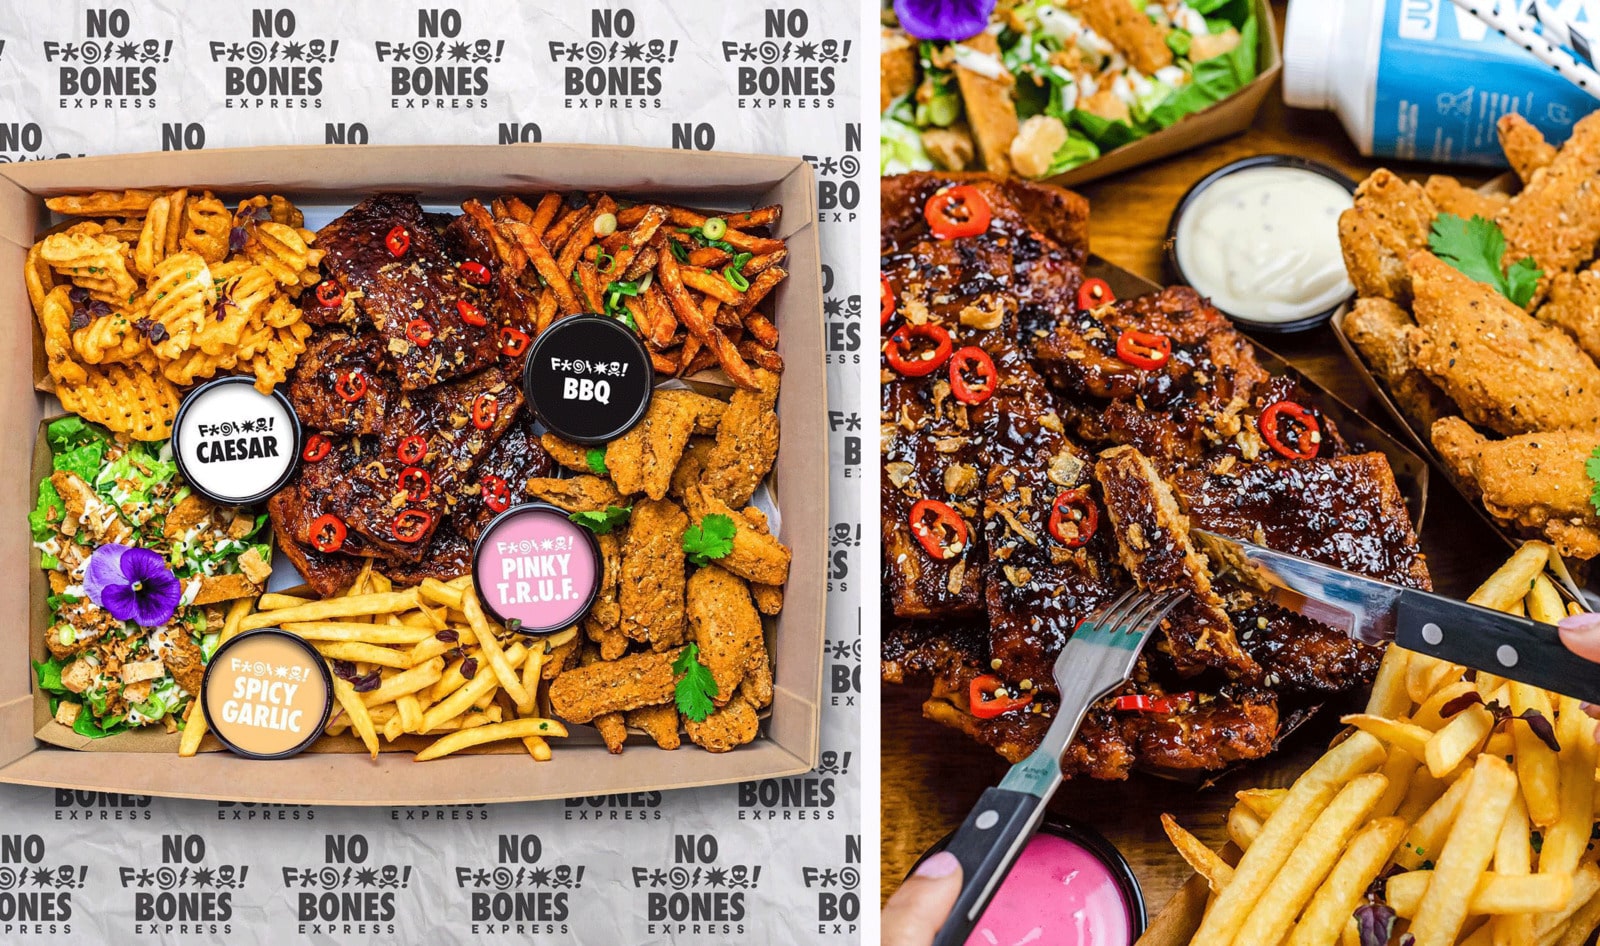 You Can Now Get a Box of Vegan Ribs and Wings Delivered in Amsterdam